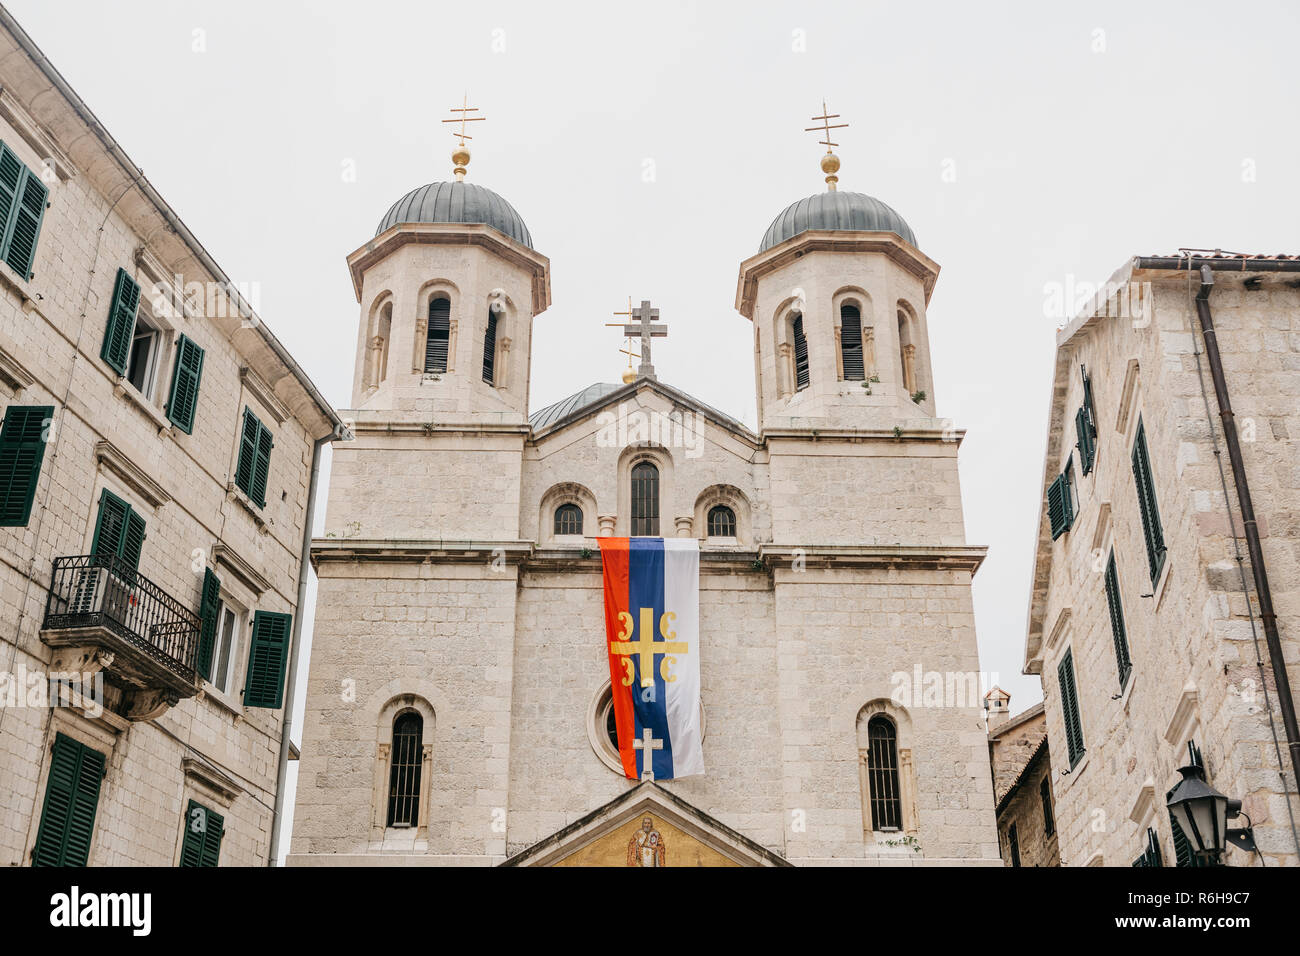 View of the Orthodox Church in Kotor in Montenegro. On the building is a religious Christian flag with a cross. Stock Photo